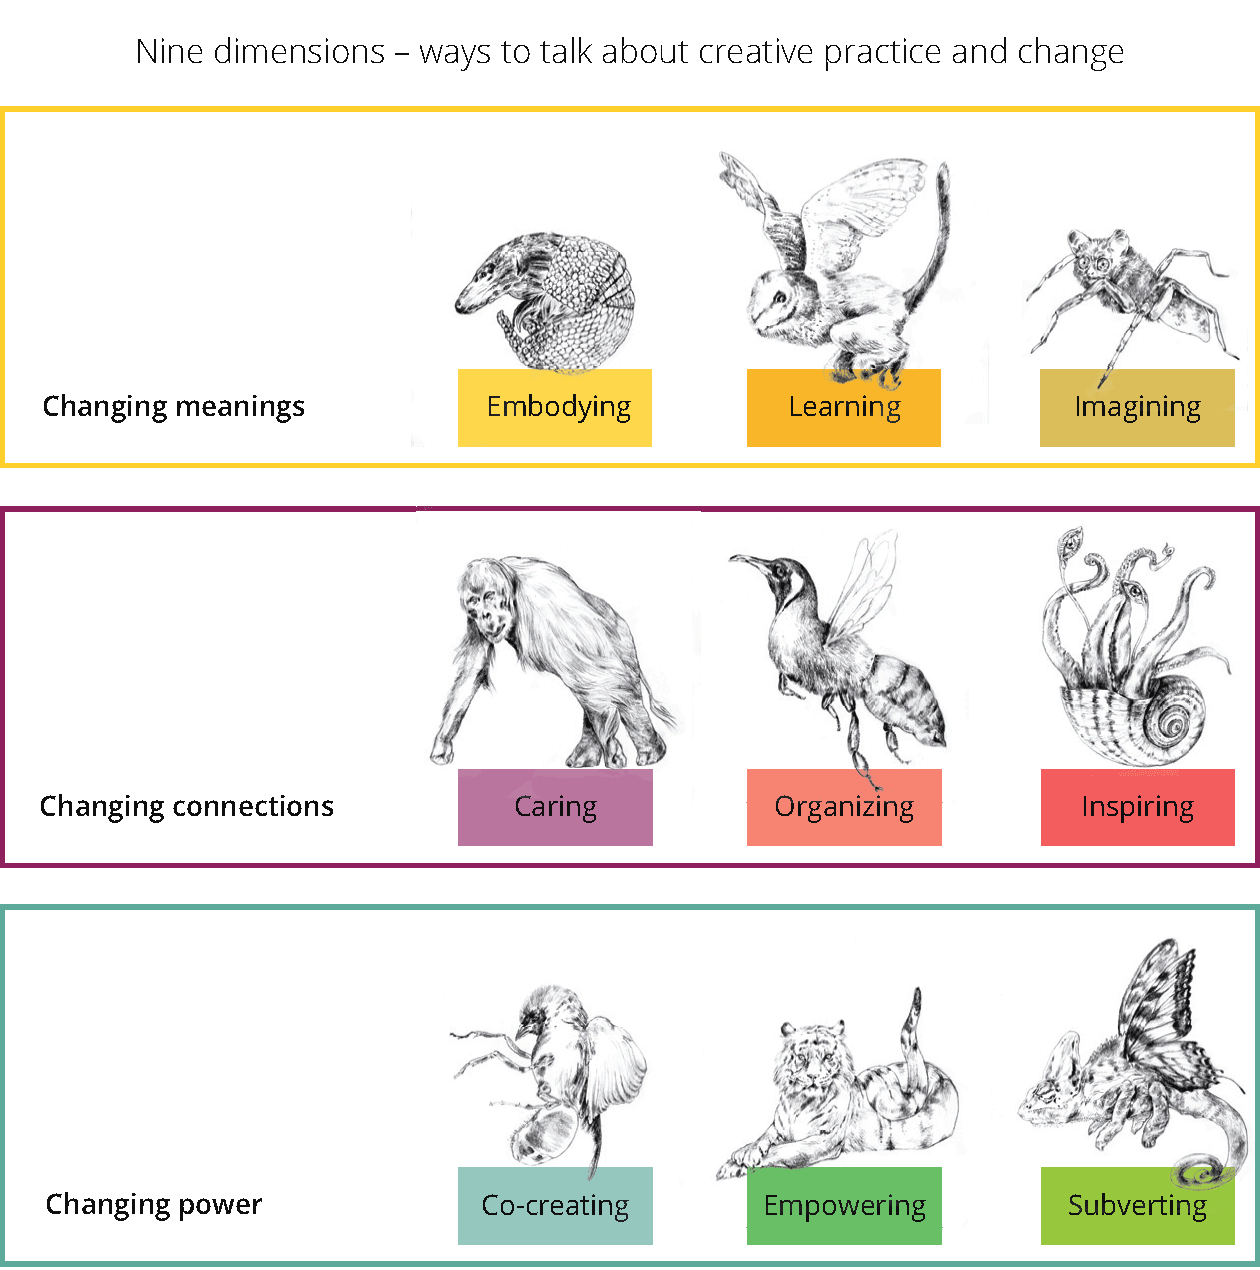 A visual framework with three outline boxes, each containing 3 words and an associated creature illustration. The framework consists of three categories of change, and nine dimensions: changing meanings (embodying, learning, and imagining); changing connections (caring, organizing, and inspiring); and changing power (co-creating, empowering, and subverting).